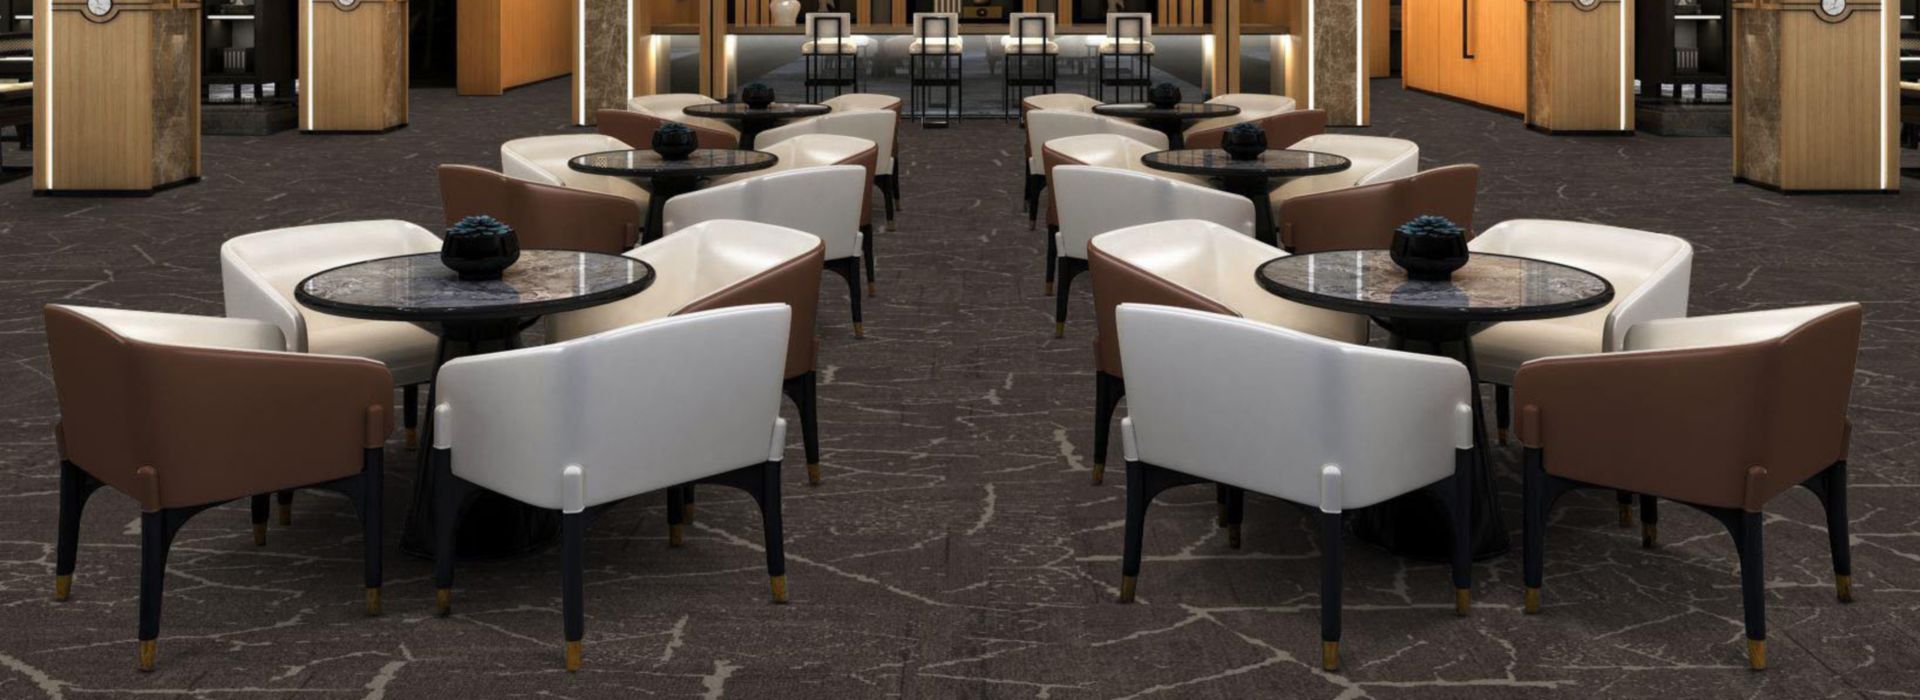 Interface LC08 carpet tile in opulent hotel lounge